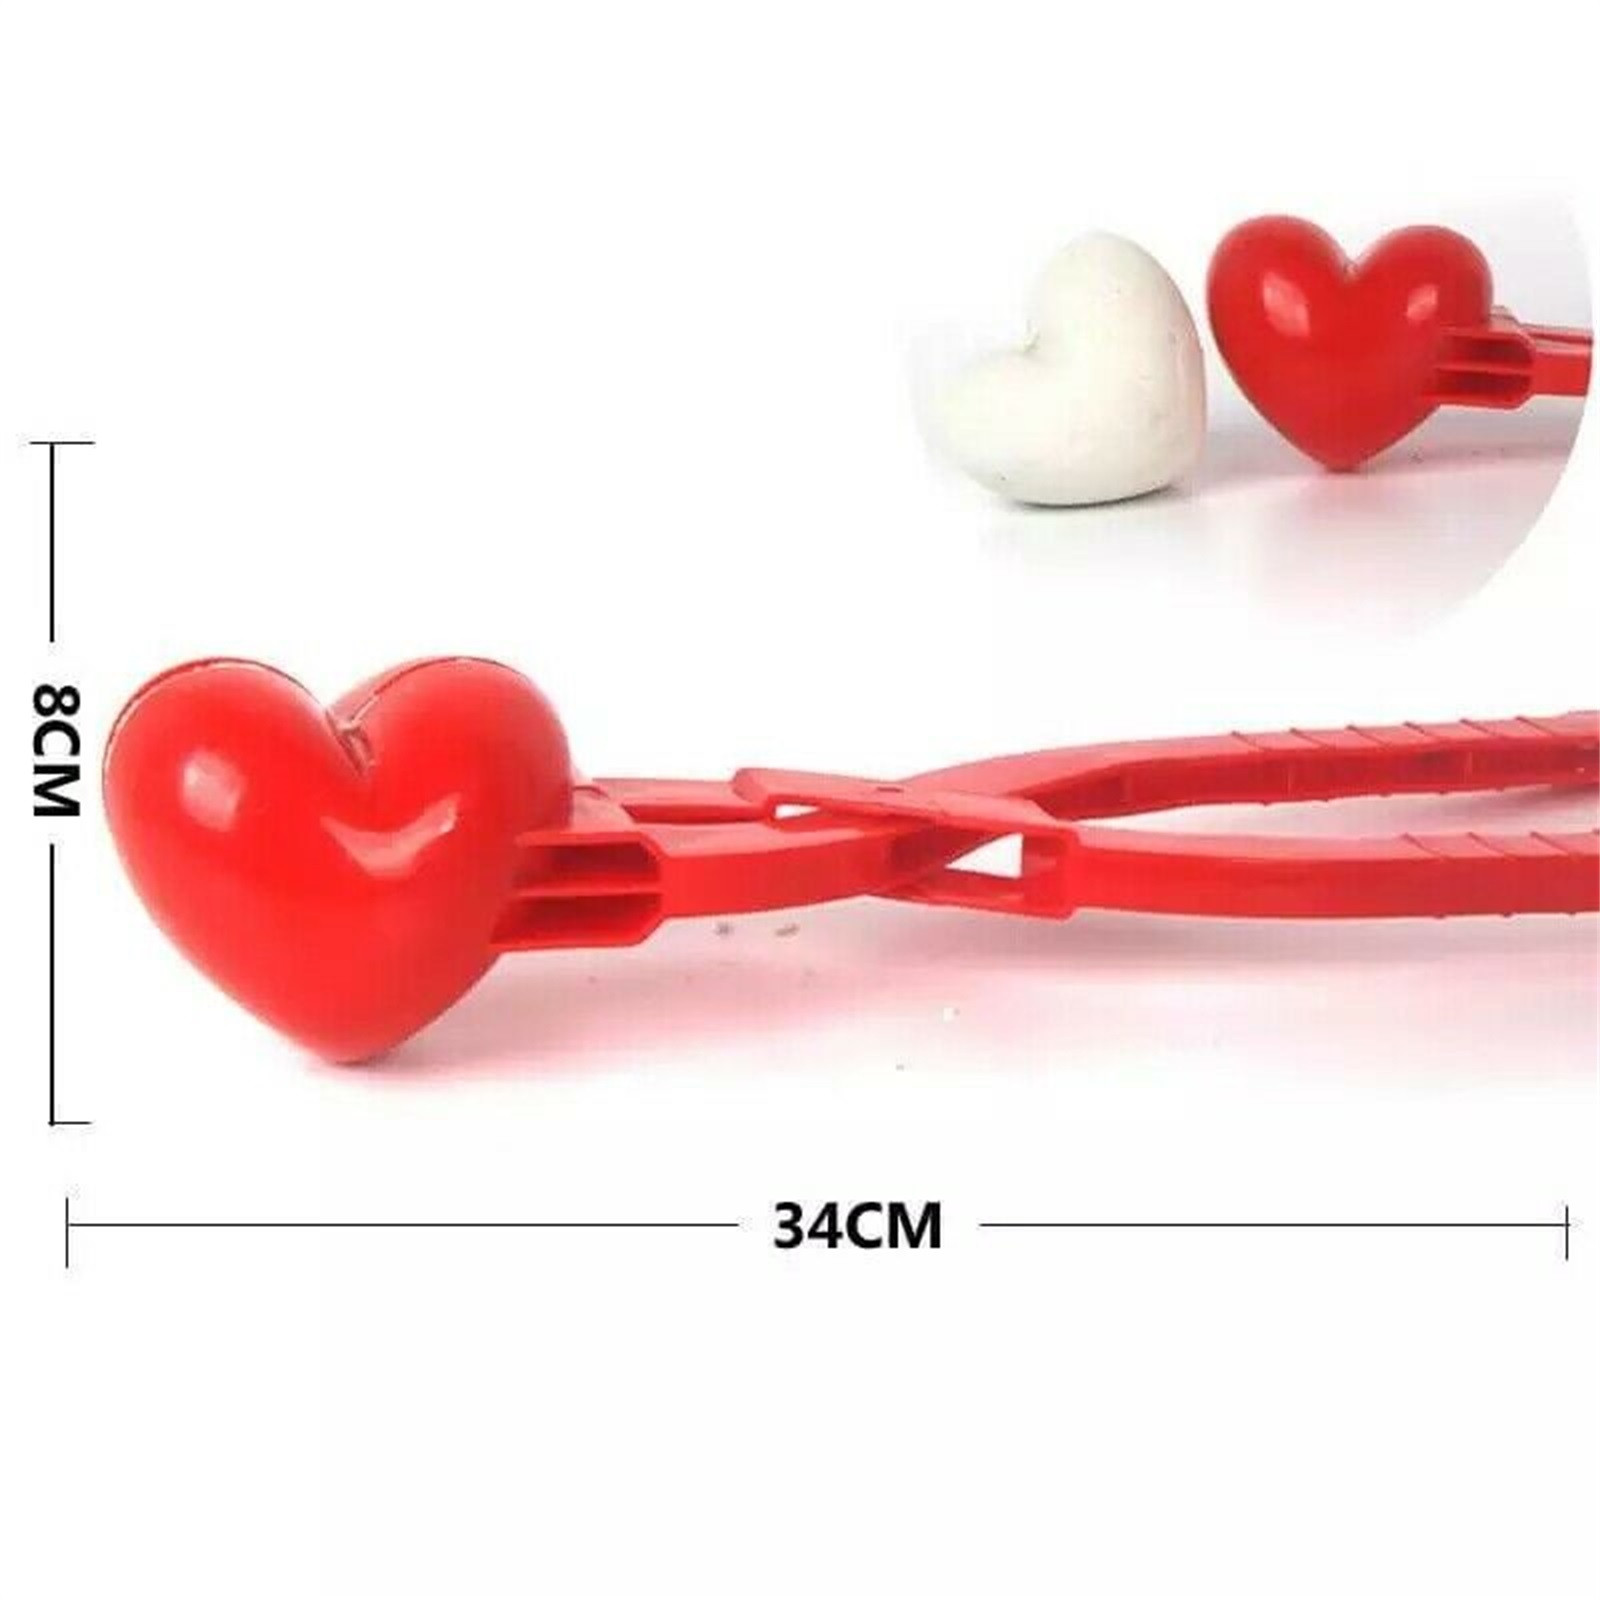 Toys Sport Creative Snow Snowball Maker Clip Maker Red Love Heart Shaped Snow Sand Mold Tool Winter Kid Valentines Day Gift Game